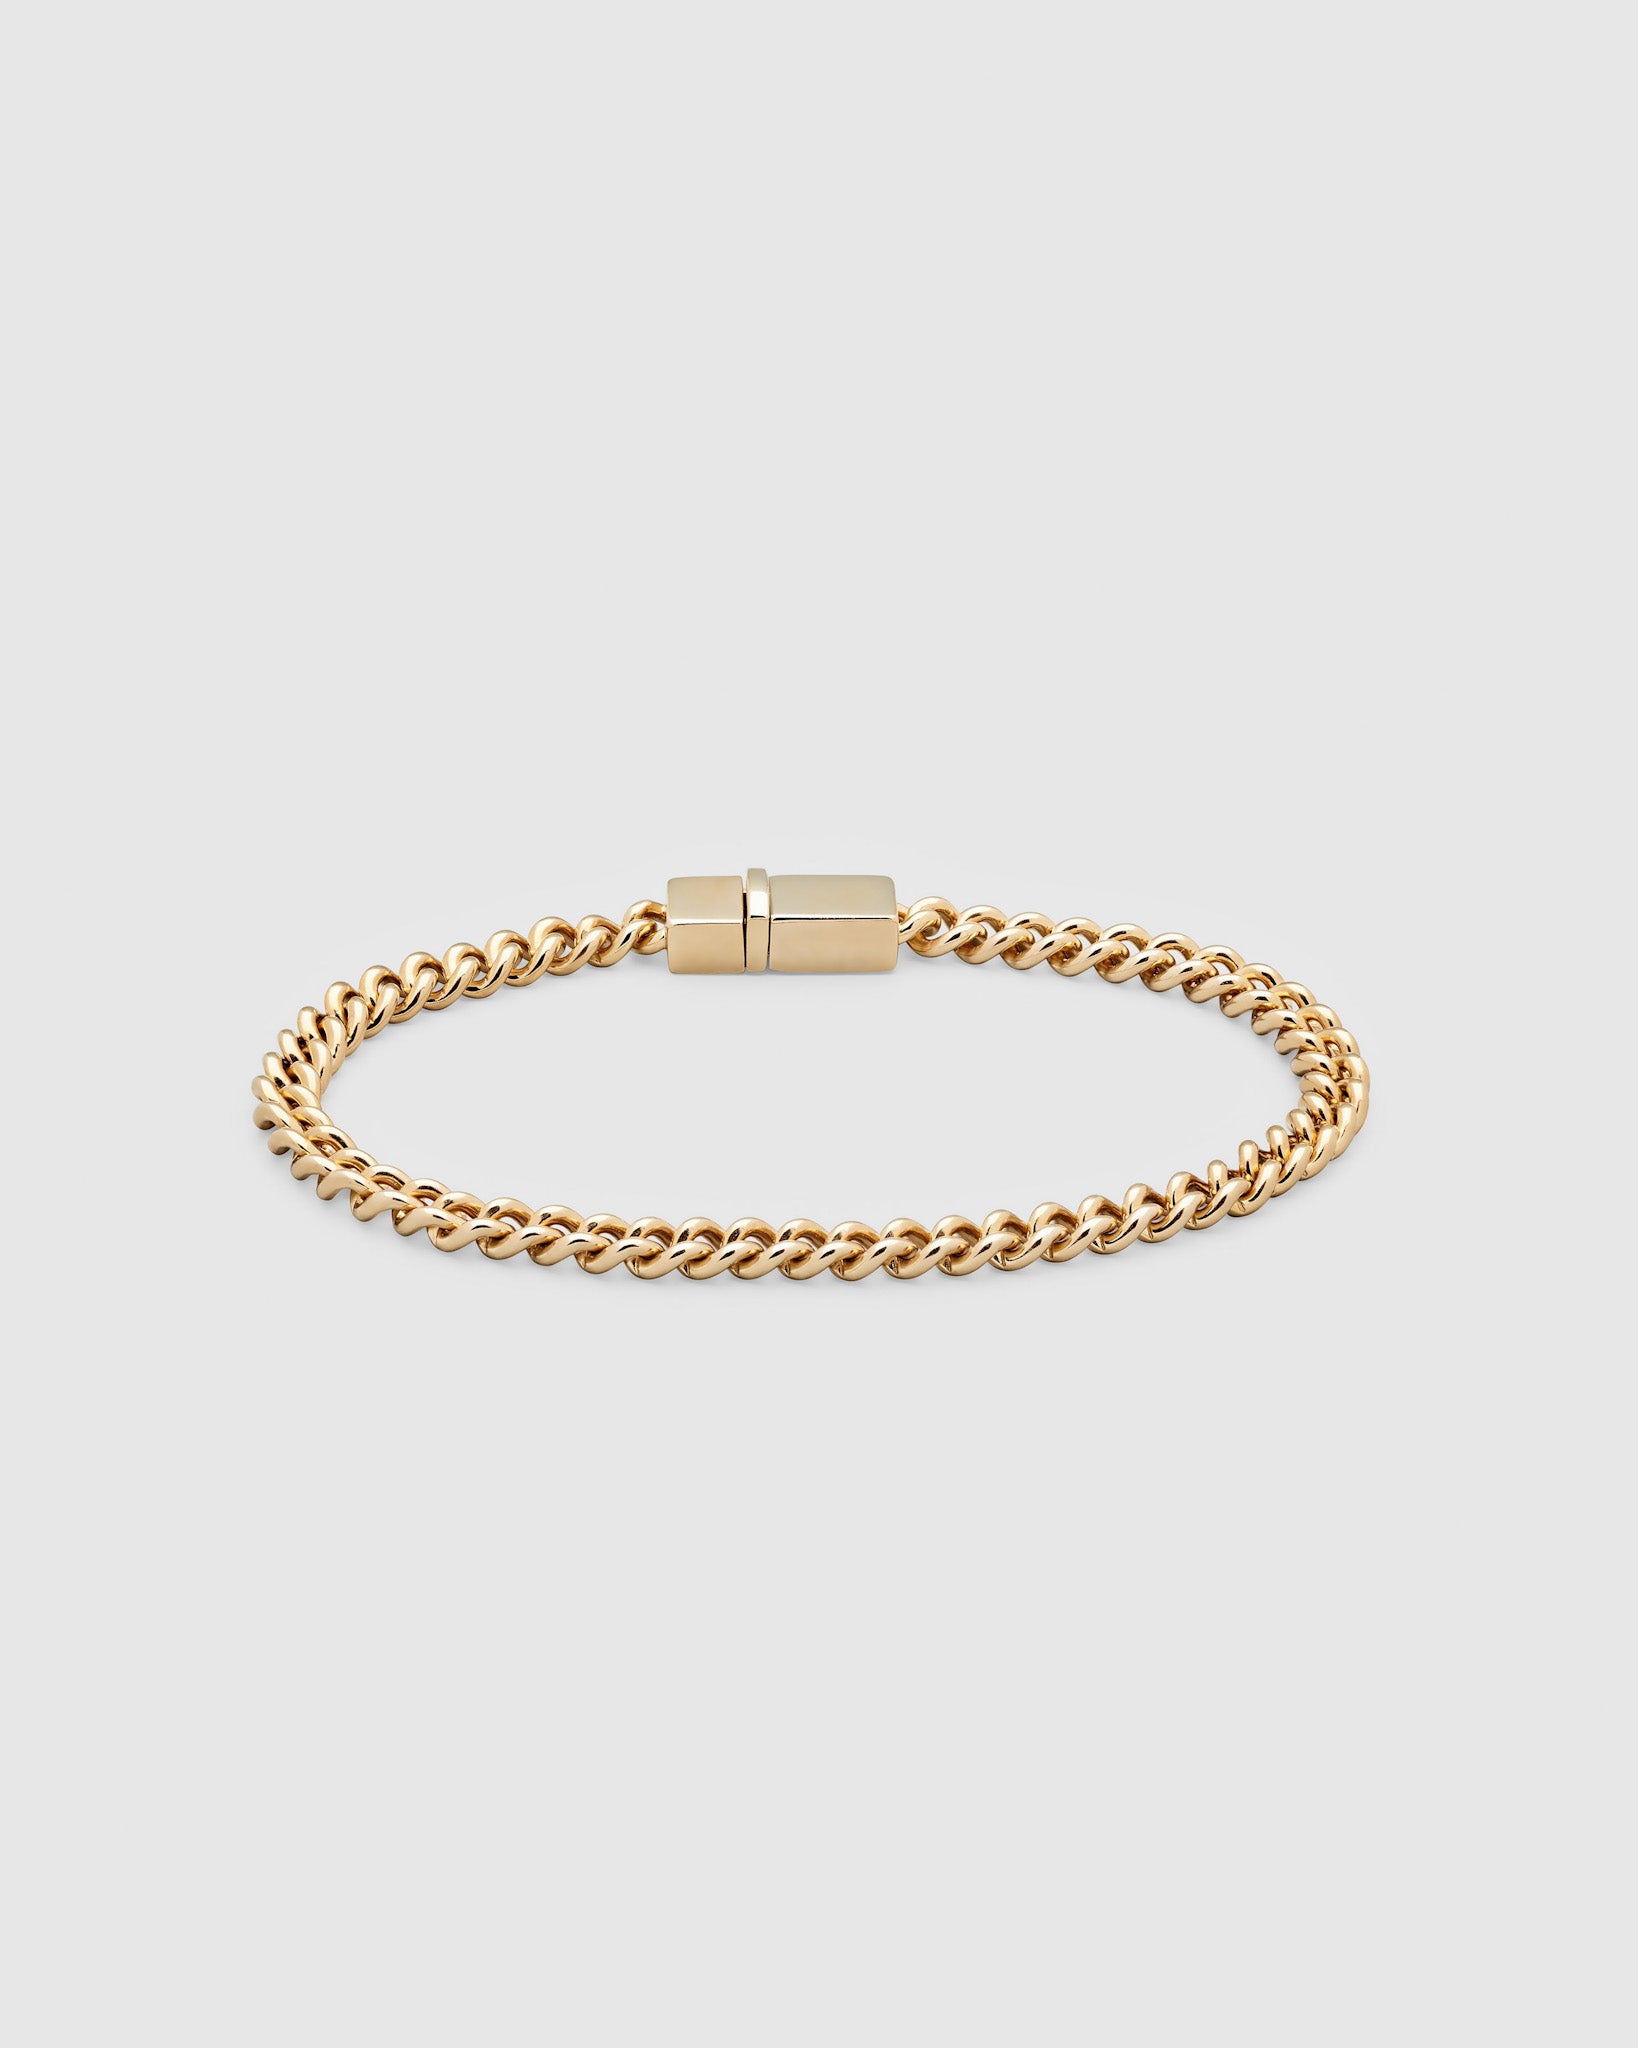 【TOM WOOD】ROUNDED CURB BRACELET THIN GOLD